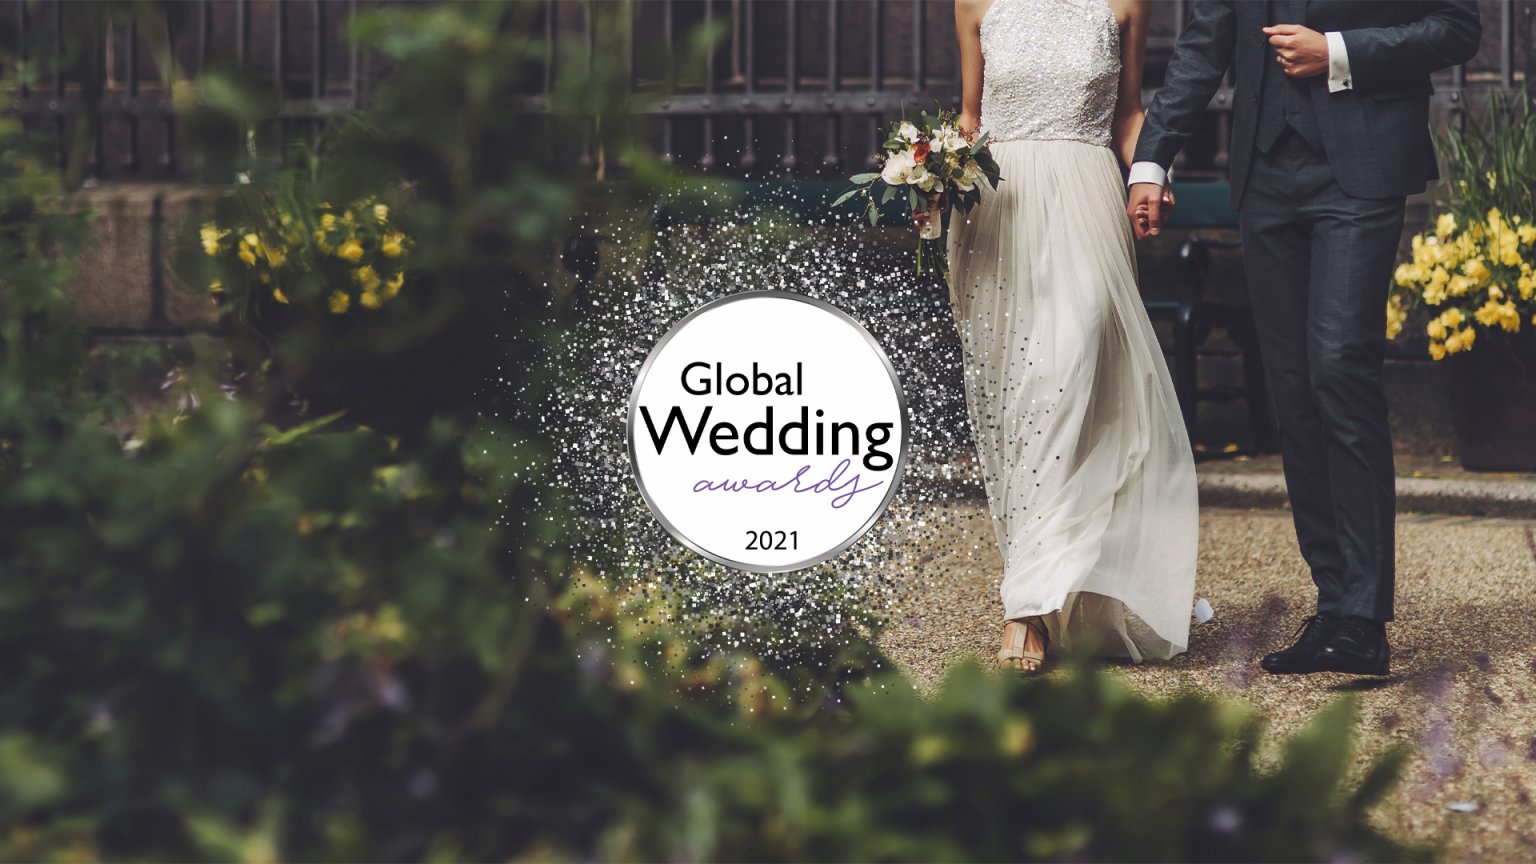 LUXlife Magazine Announces the Winners of the 2021 Global Wedding